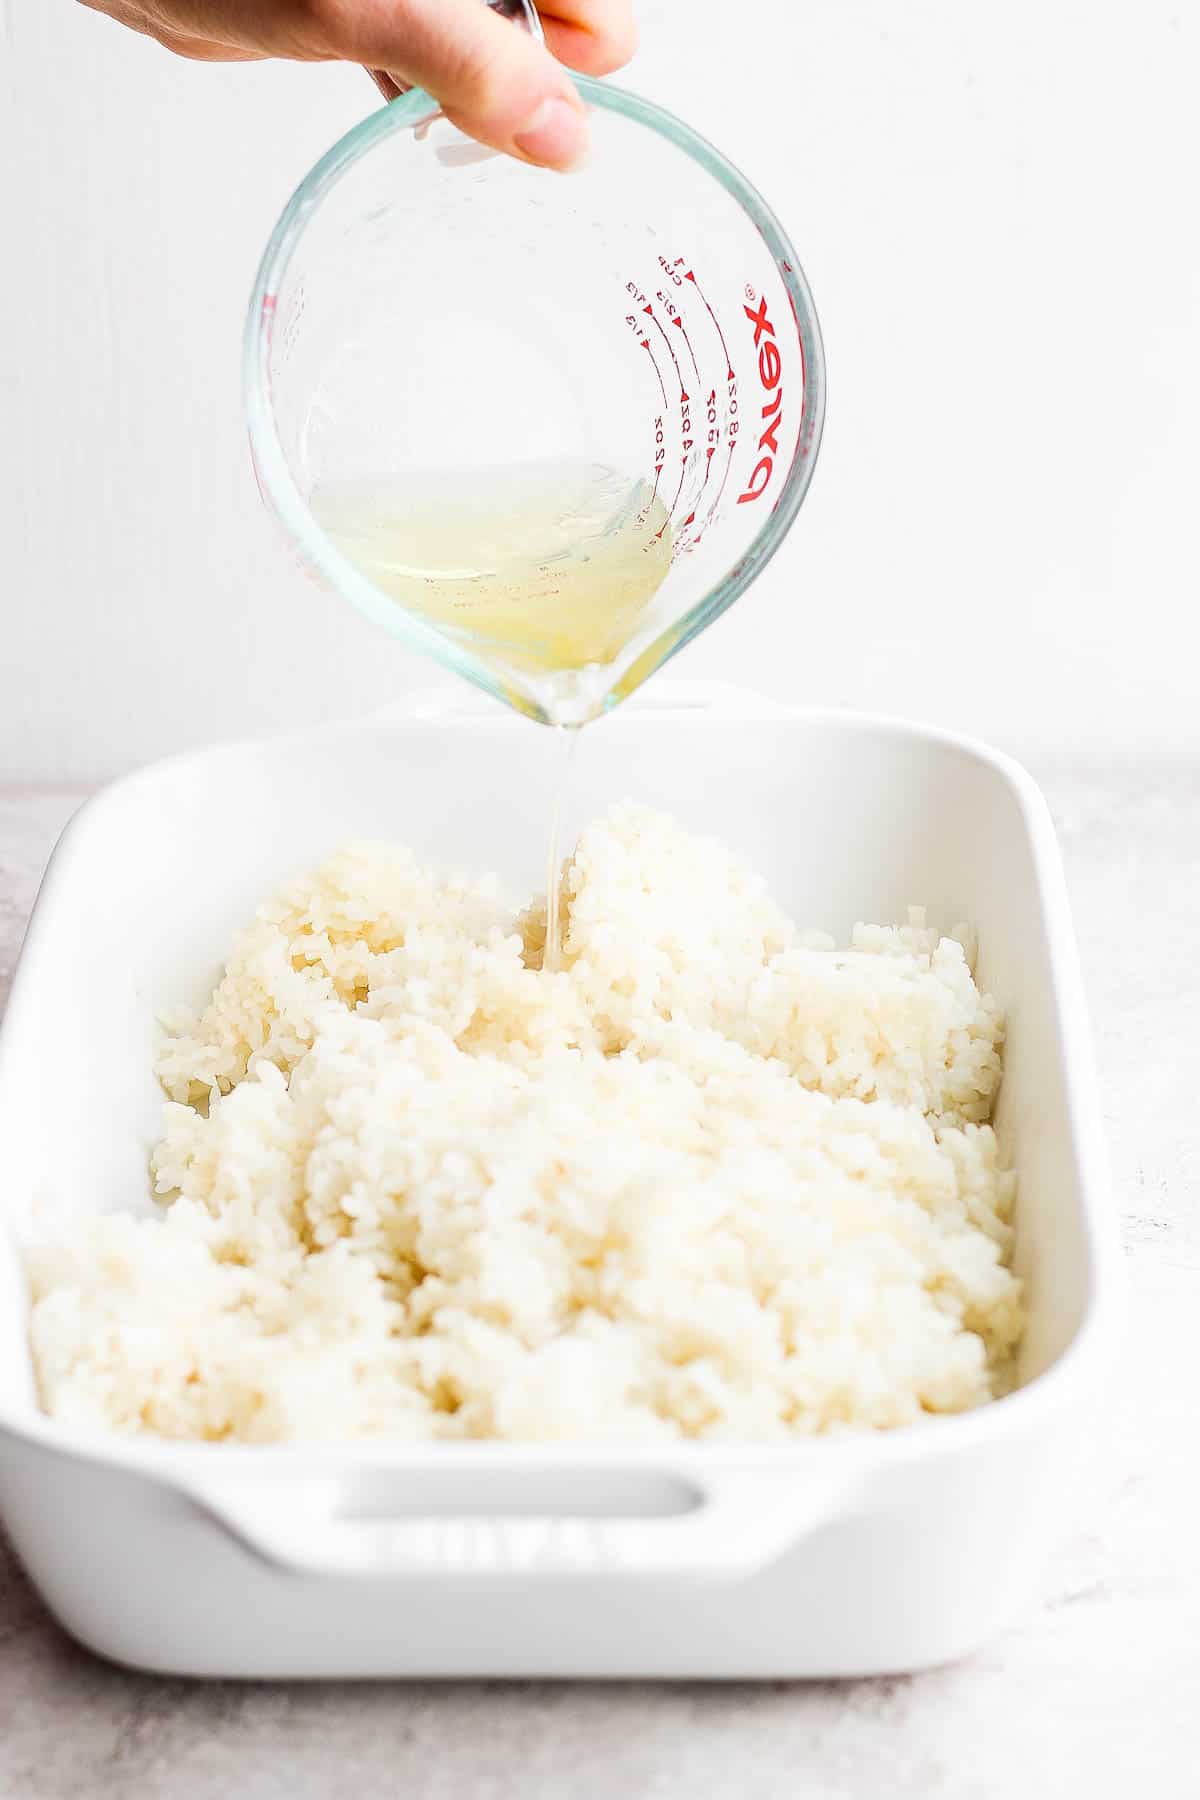 Rice vinegar mixture being poured over the cooked sushi rice in a white baking dish.